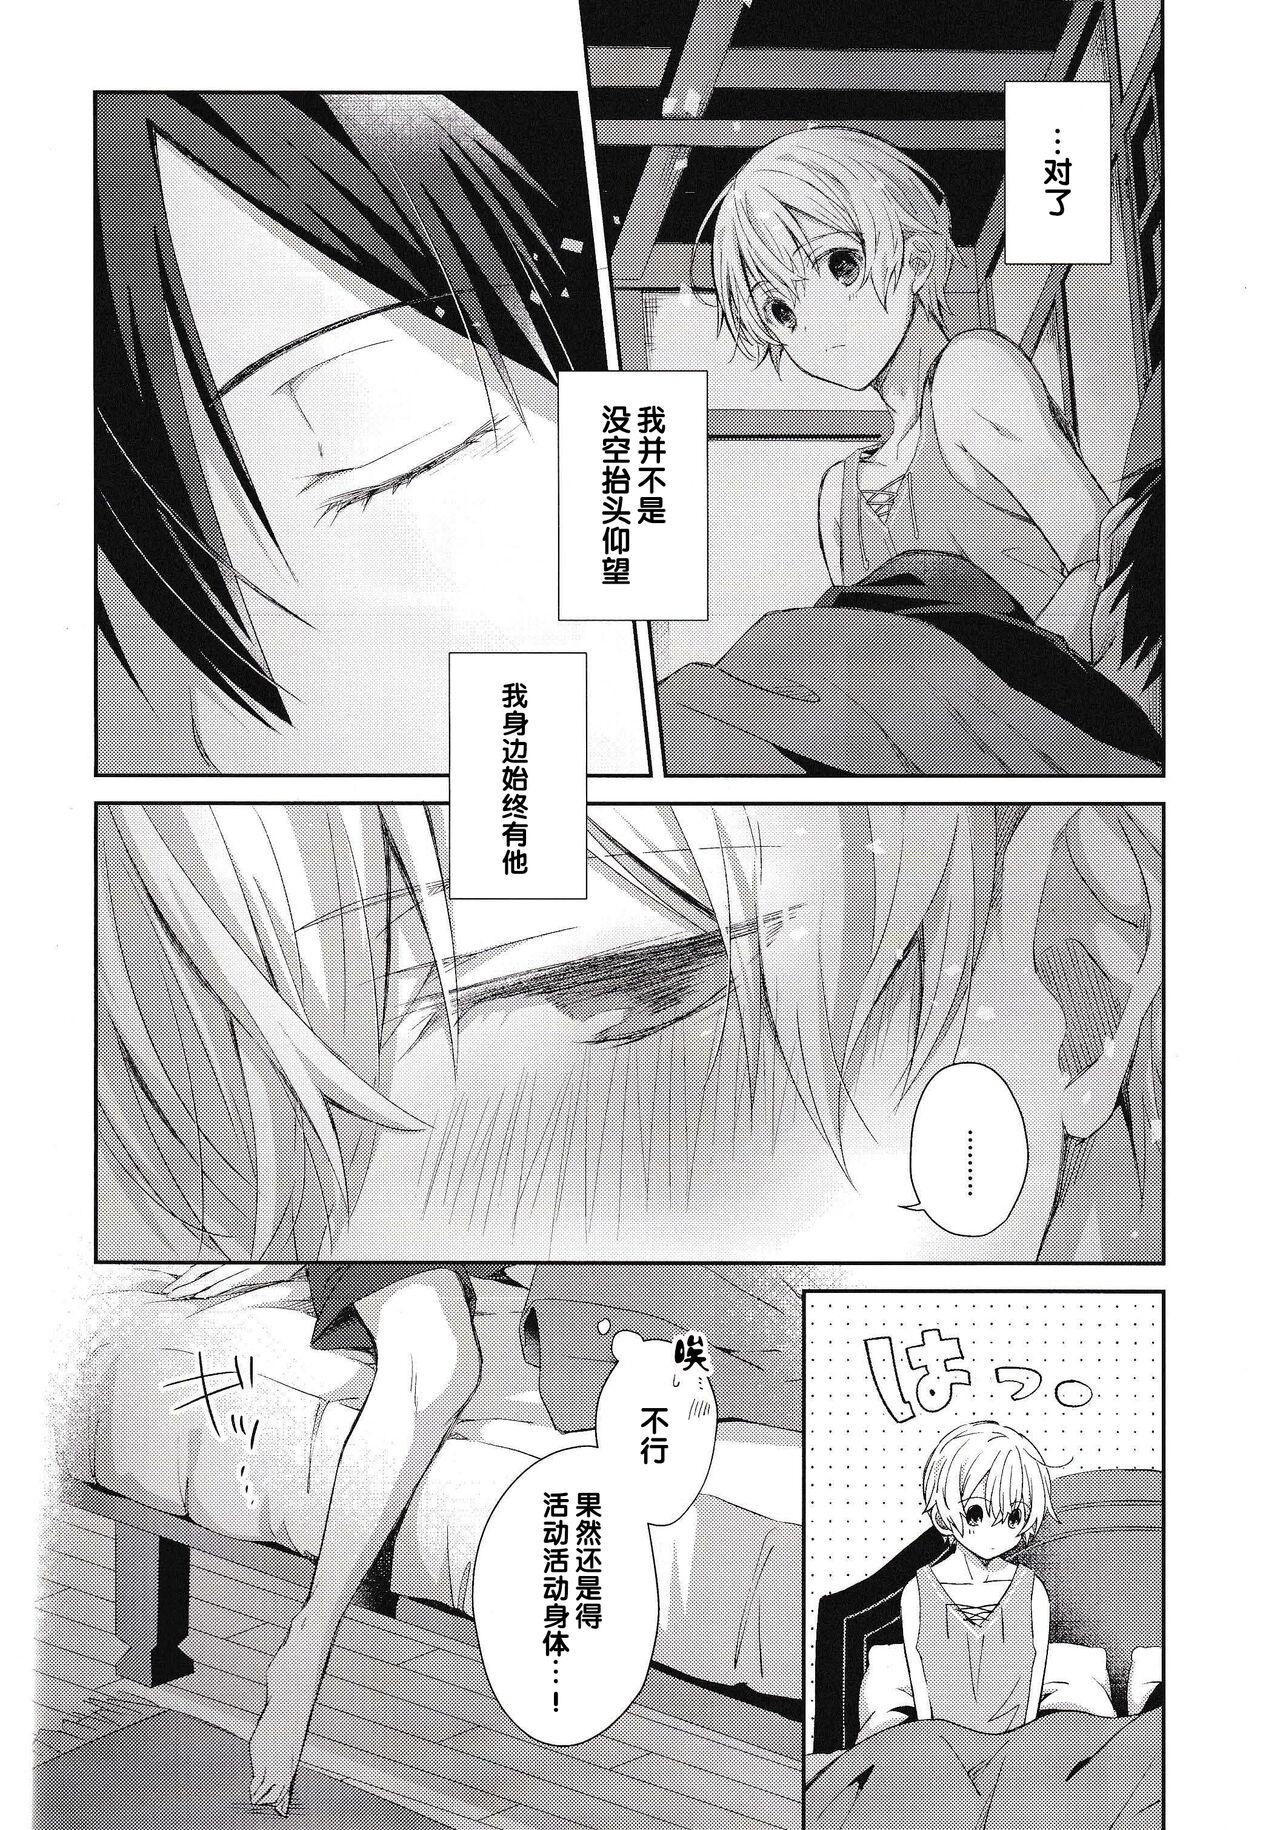 Strapon Oyasumi After Motion - Sword art online Fetiche - Page 3